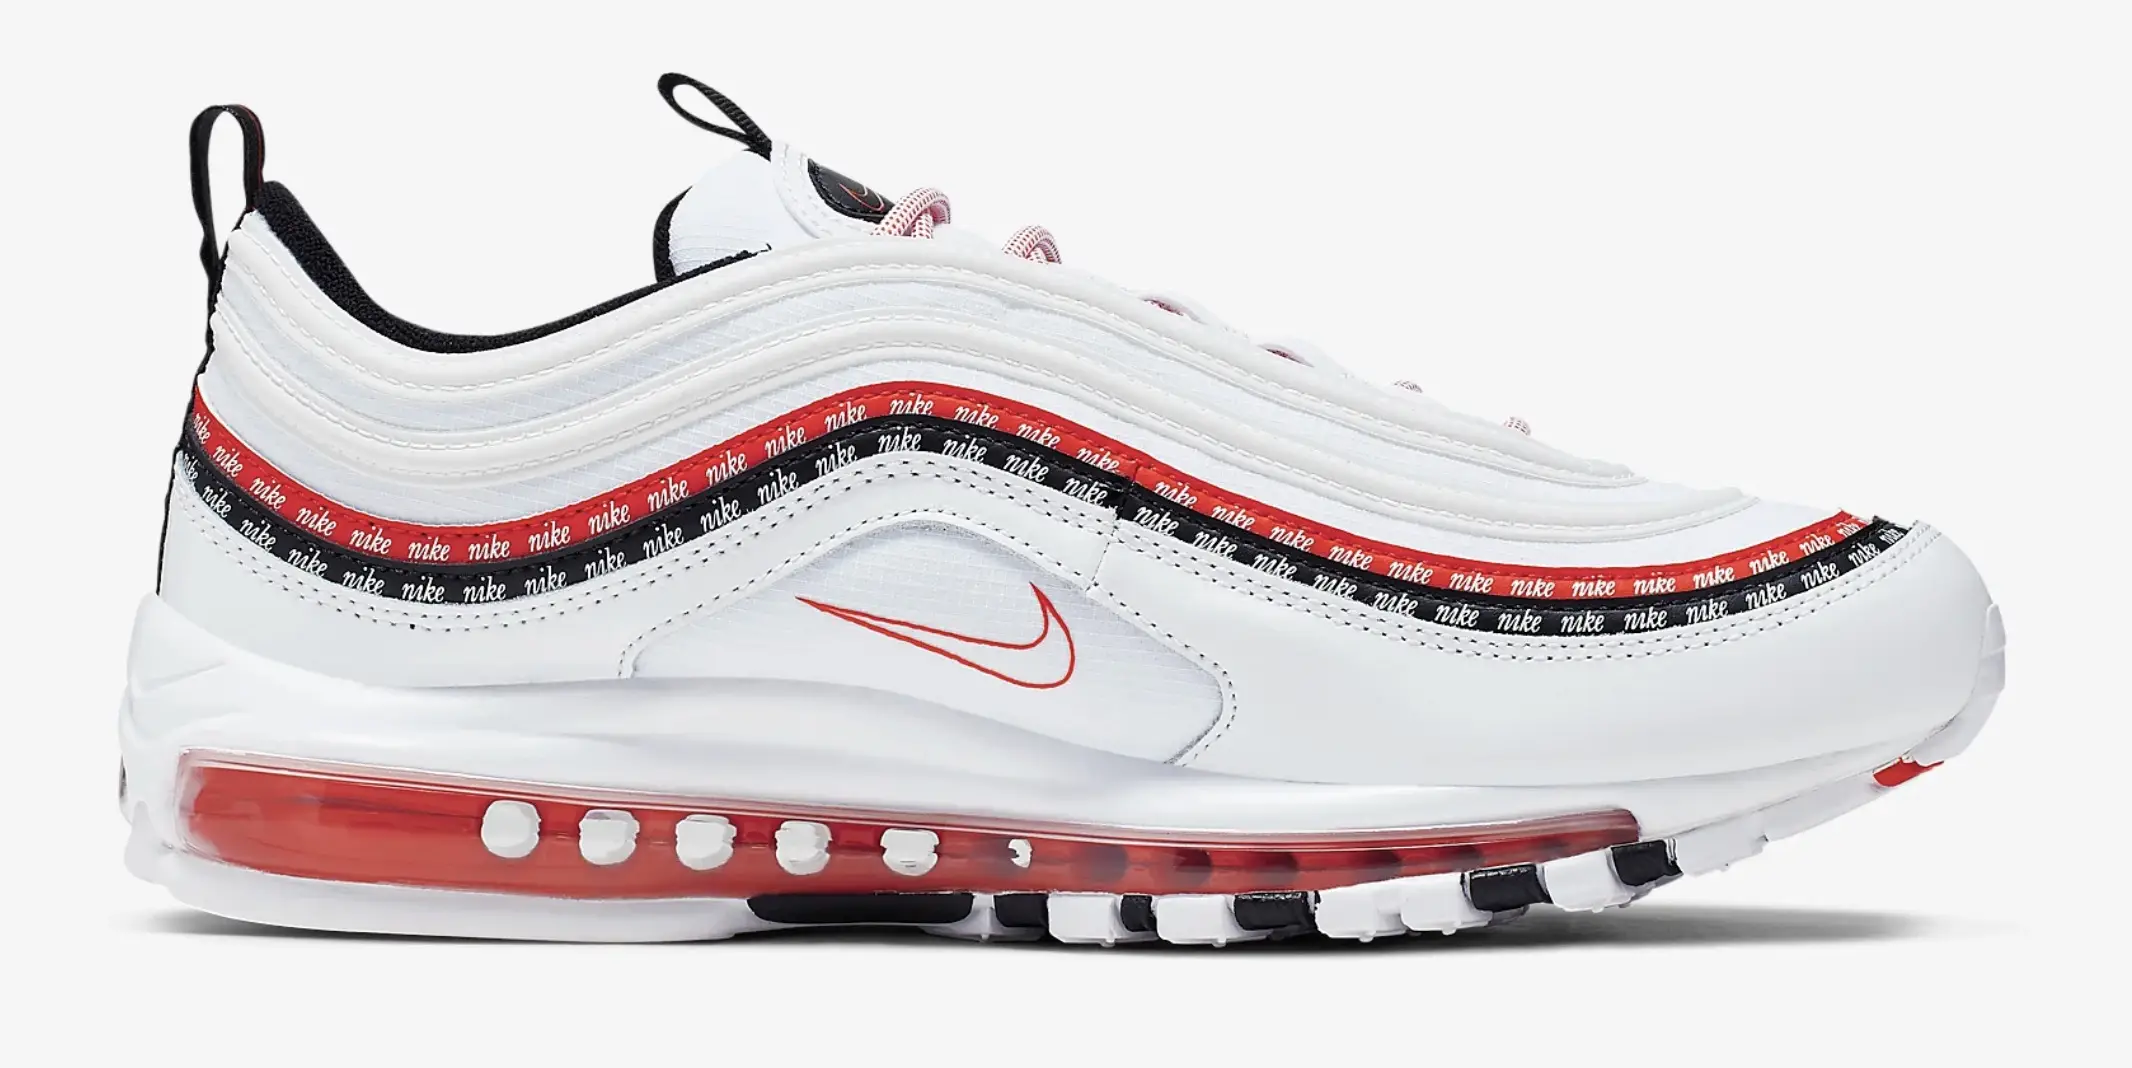 Catch The Last Small Sizes In The Nike Air Max 97 Script Swoosh | The ...